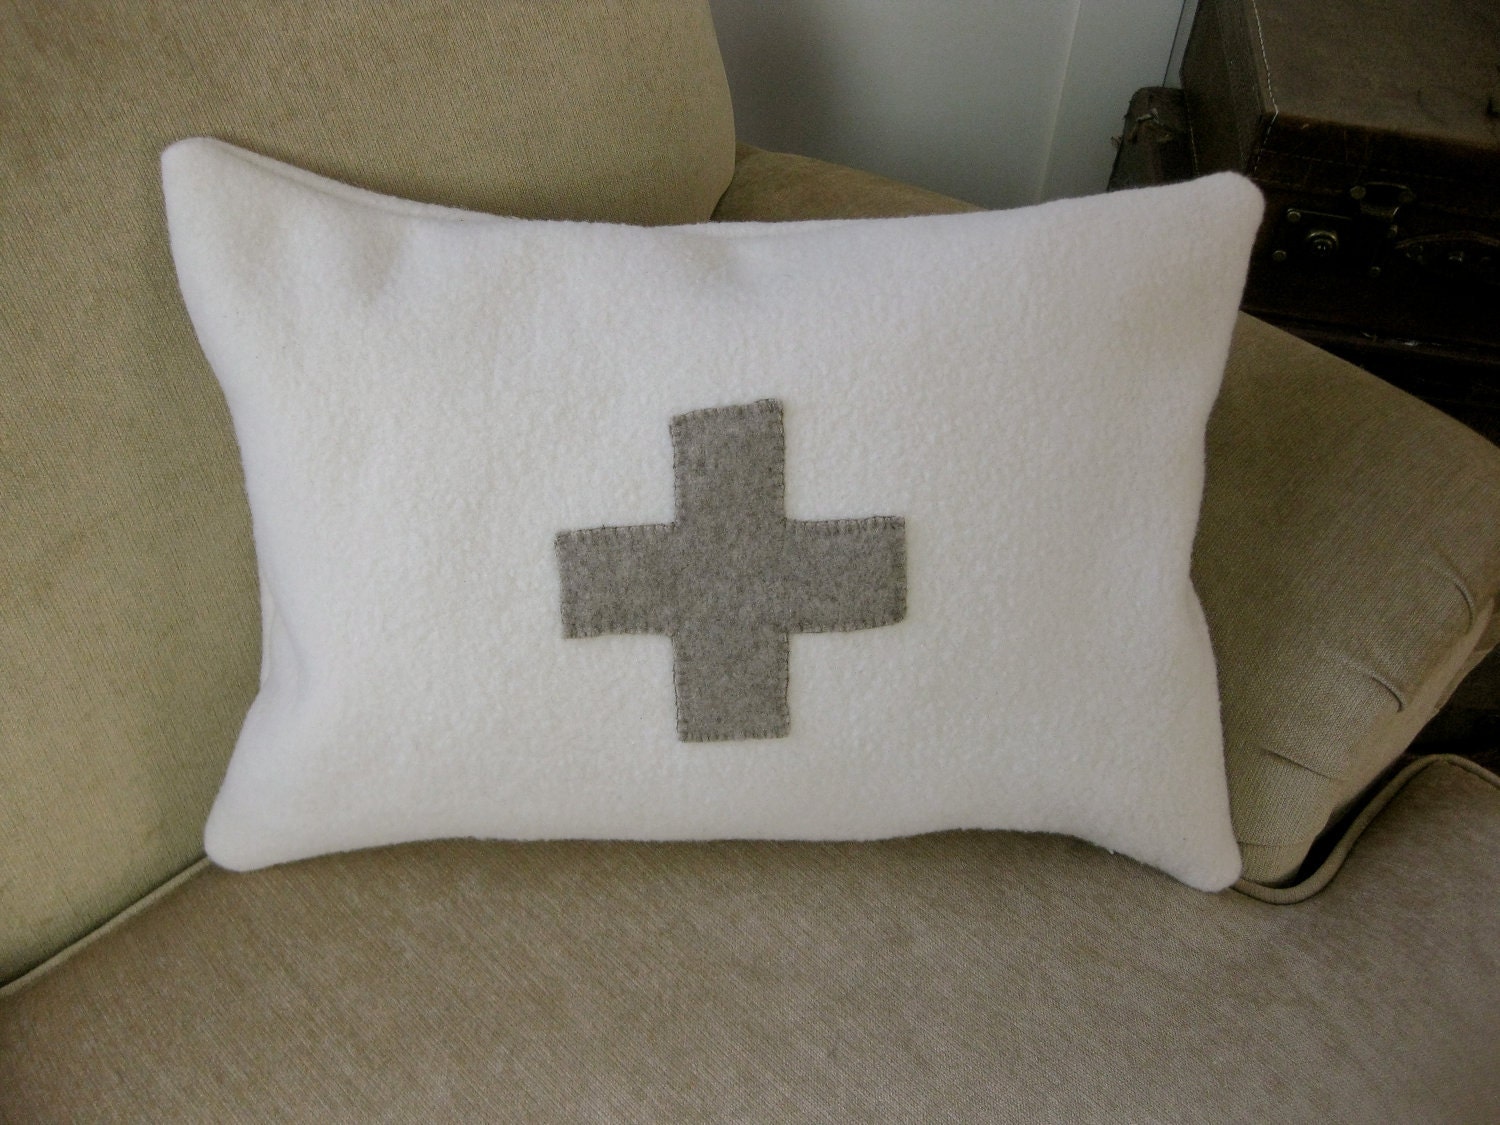 Beautiful Swiss Cross Pillow - Made from a Recycle Wool Sweater and a US Navy Blanket